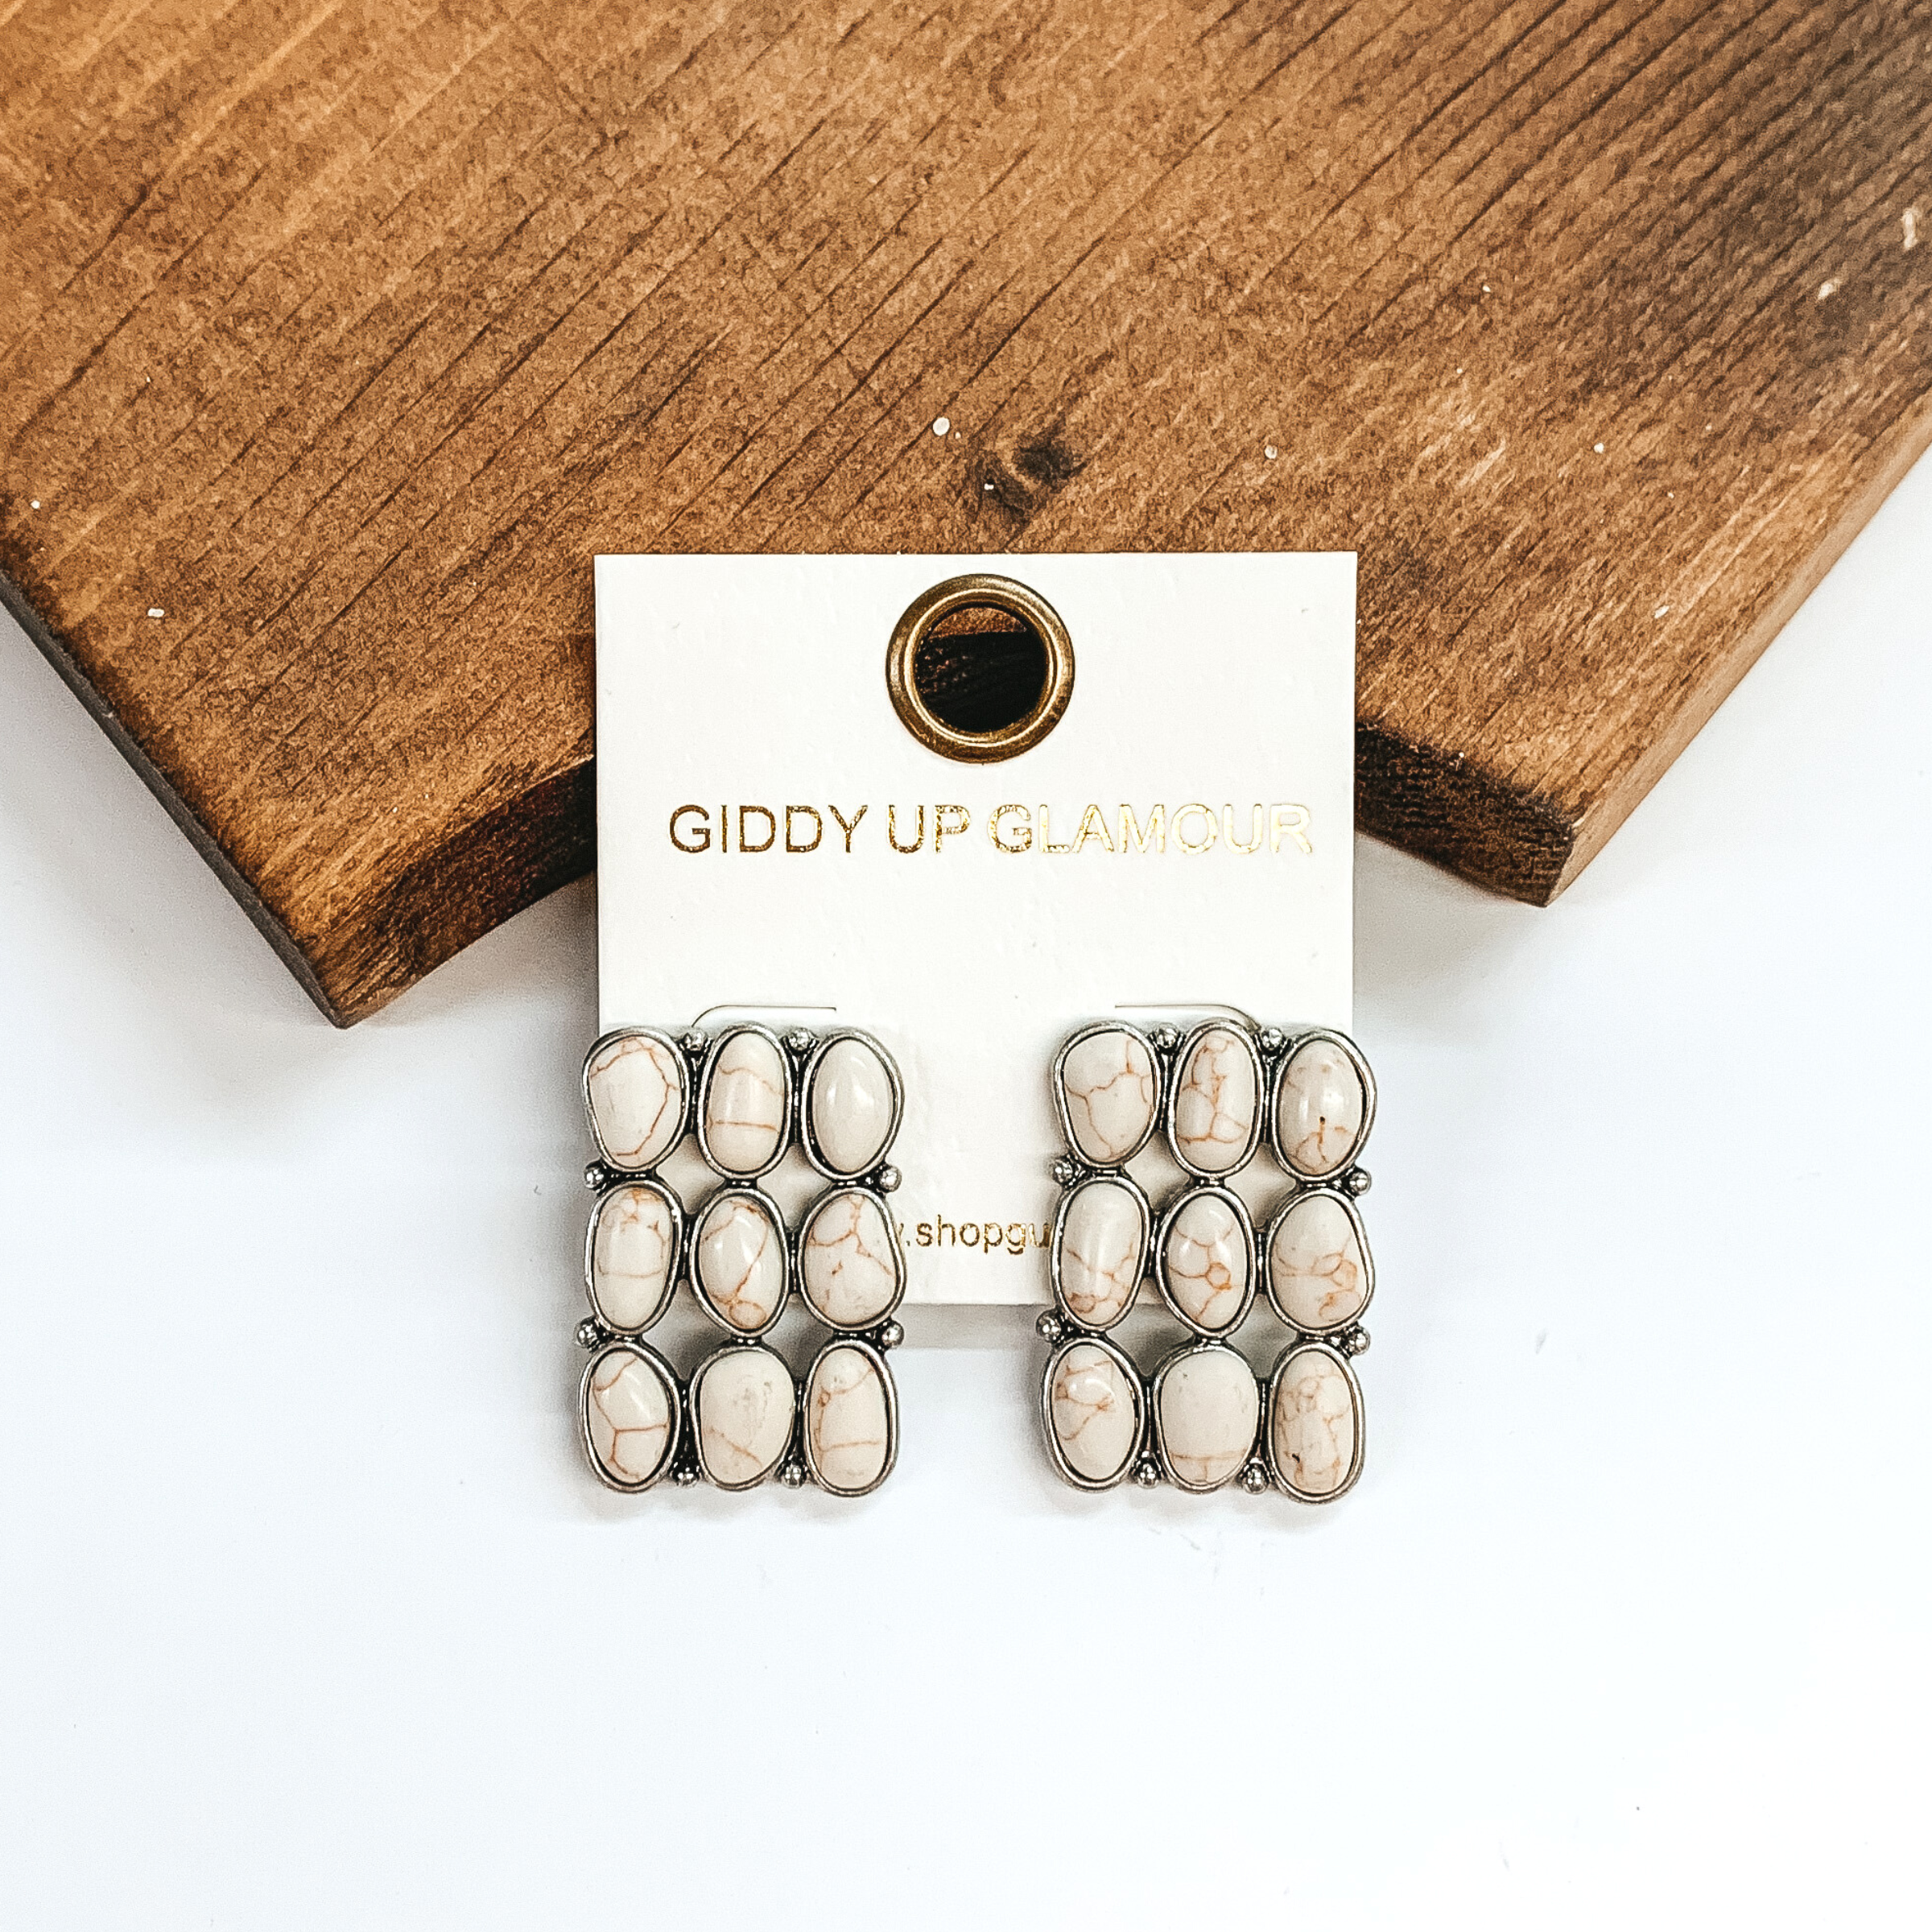 Nine ivory stone rectangle earrings. These earrings are pictured leaning against a brown block on a white background.